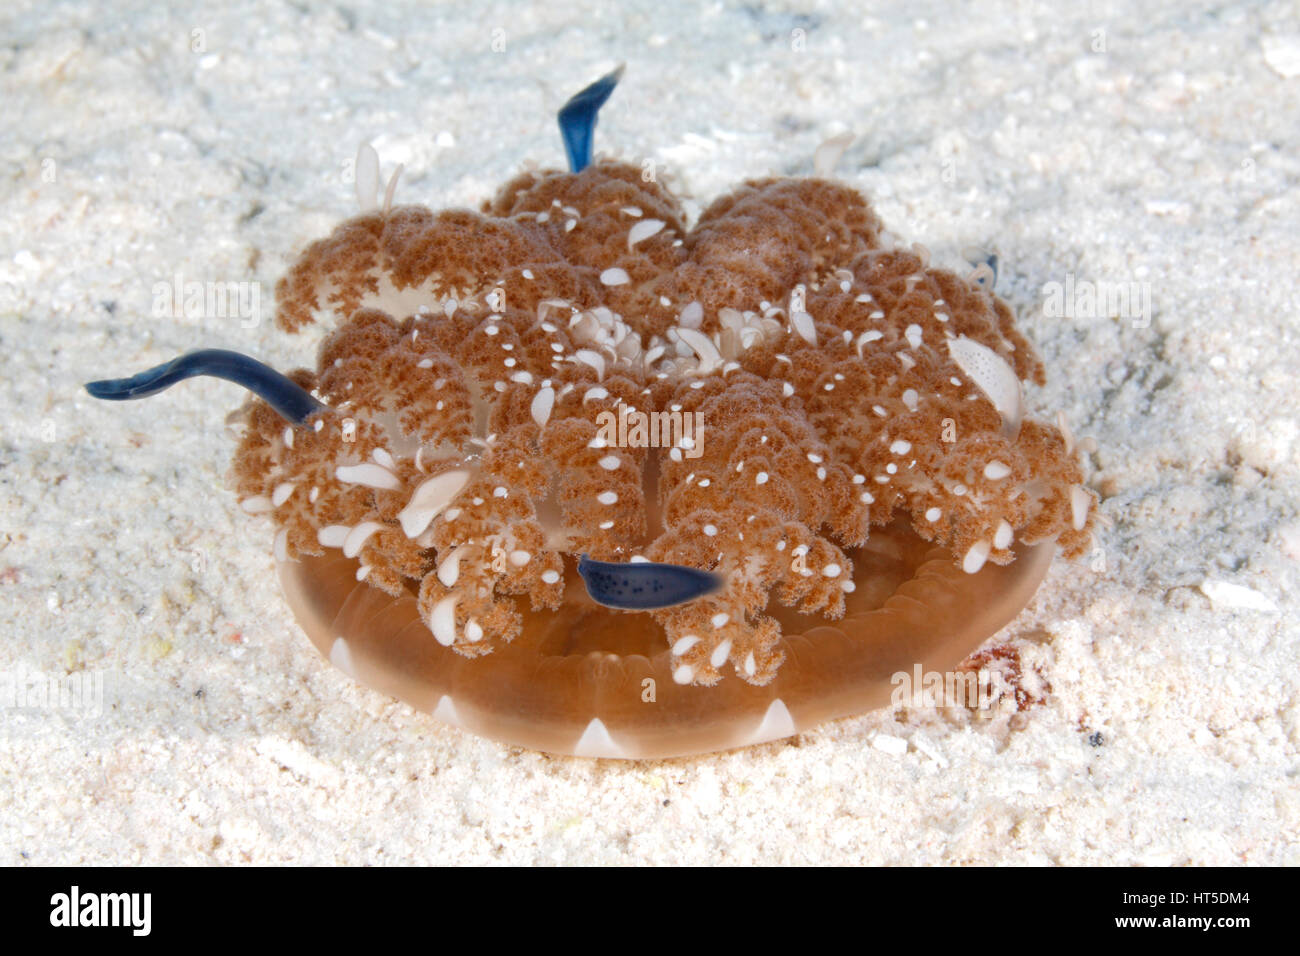 Upside Down Jellyfish, Cassiopea andromeda. This jellyfish usually has its mouth upward on the bottom. Stock Photo